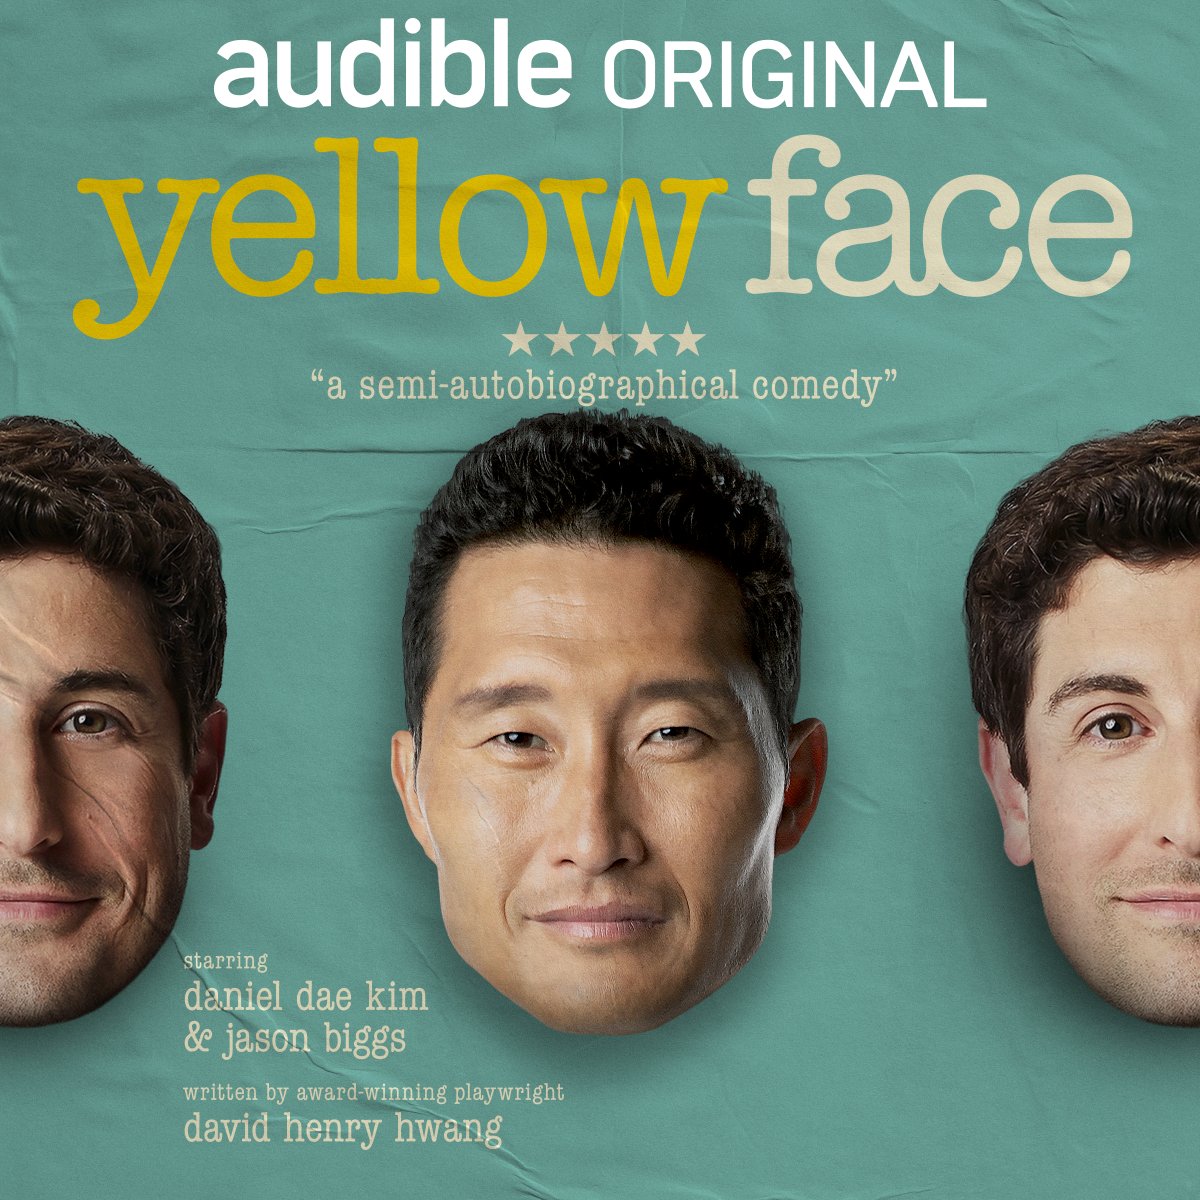 Winner of an Obie & a finalist for the Pulitzer Prize, David Henry Hwang’s Yellow Face is as timely as ever, wrestling with issues of cultural appropriation, complicity & artistic freedom.

Listen now at audible.com/yellowface and start a 30-day free trial! #YellowFace #AANHPIHM